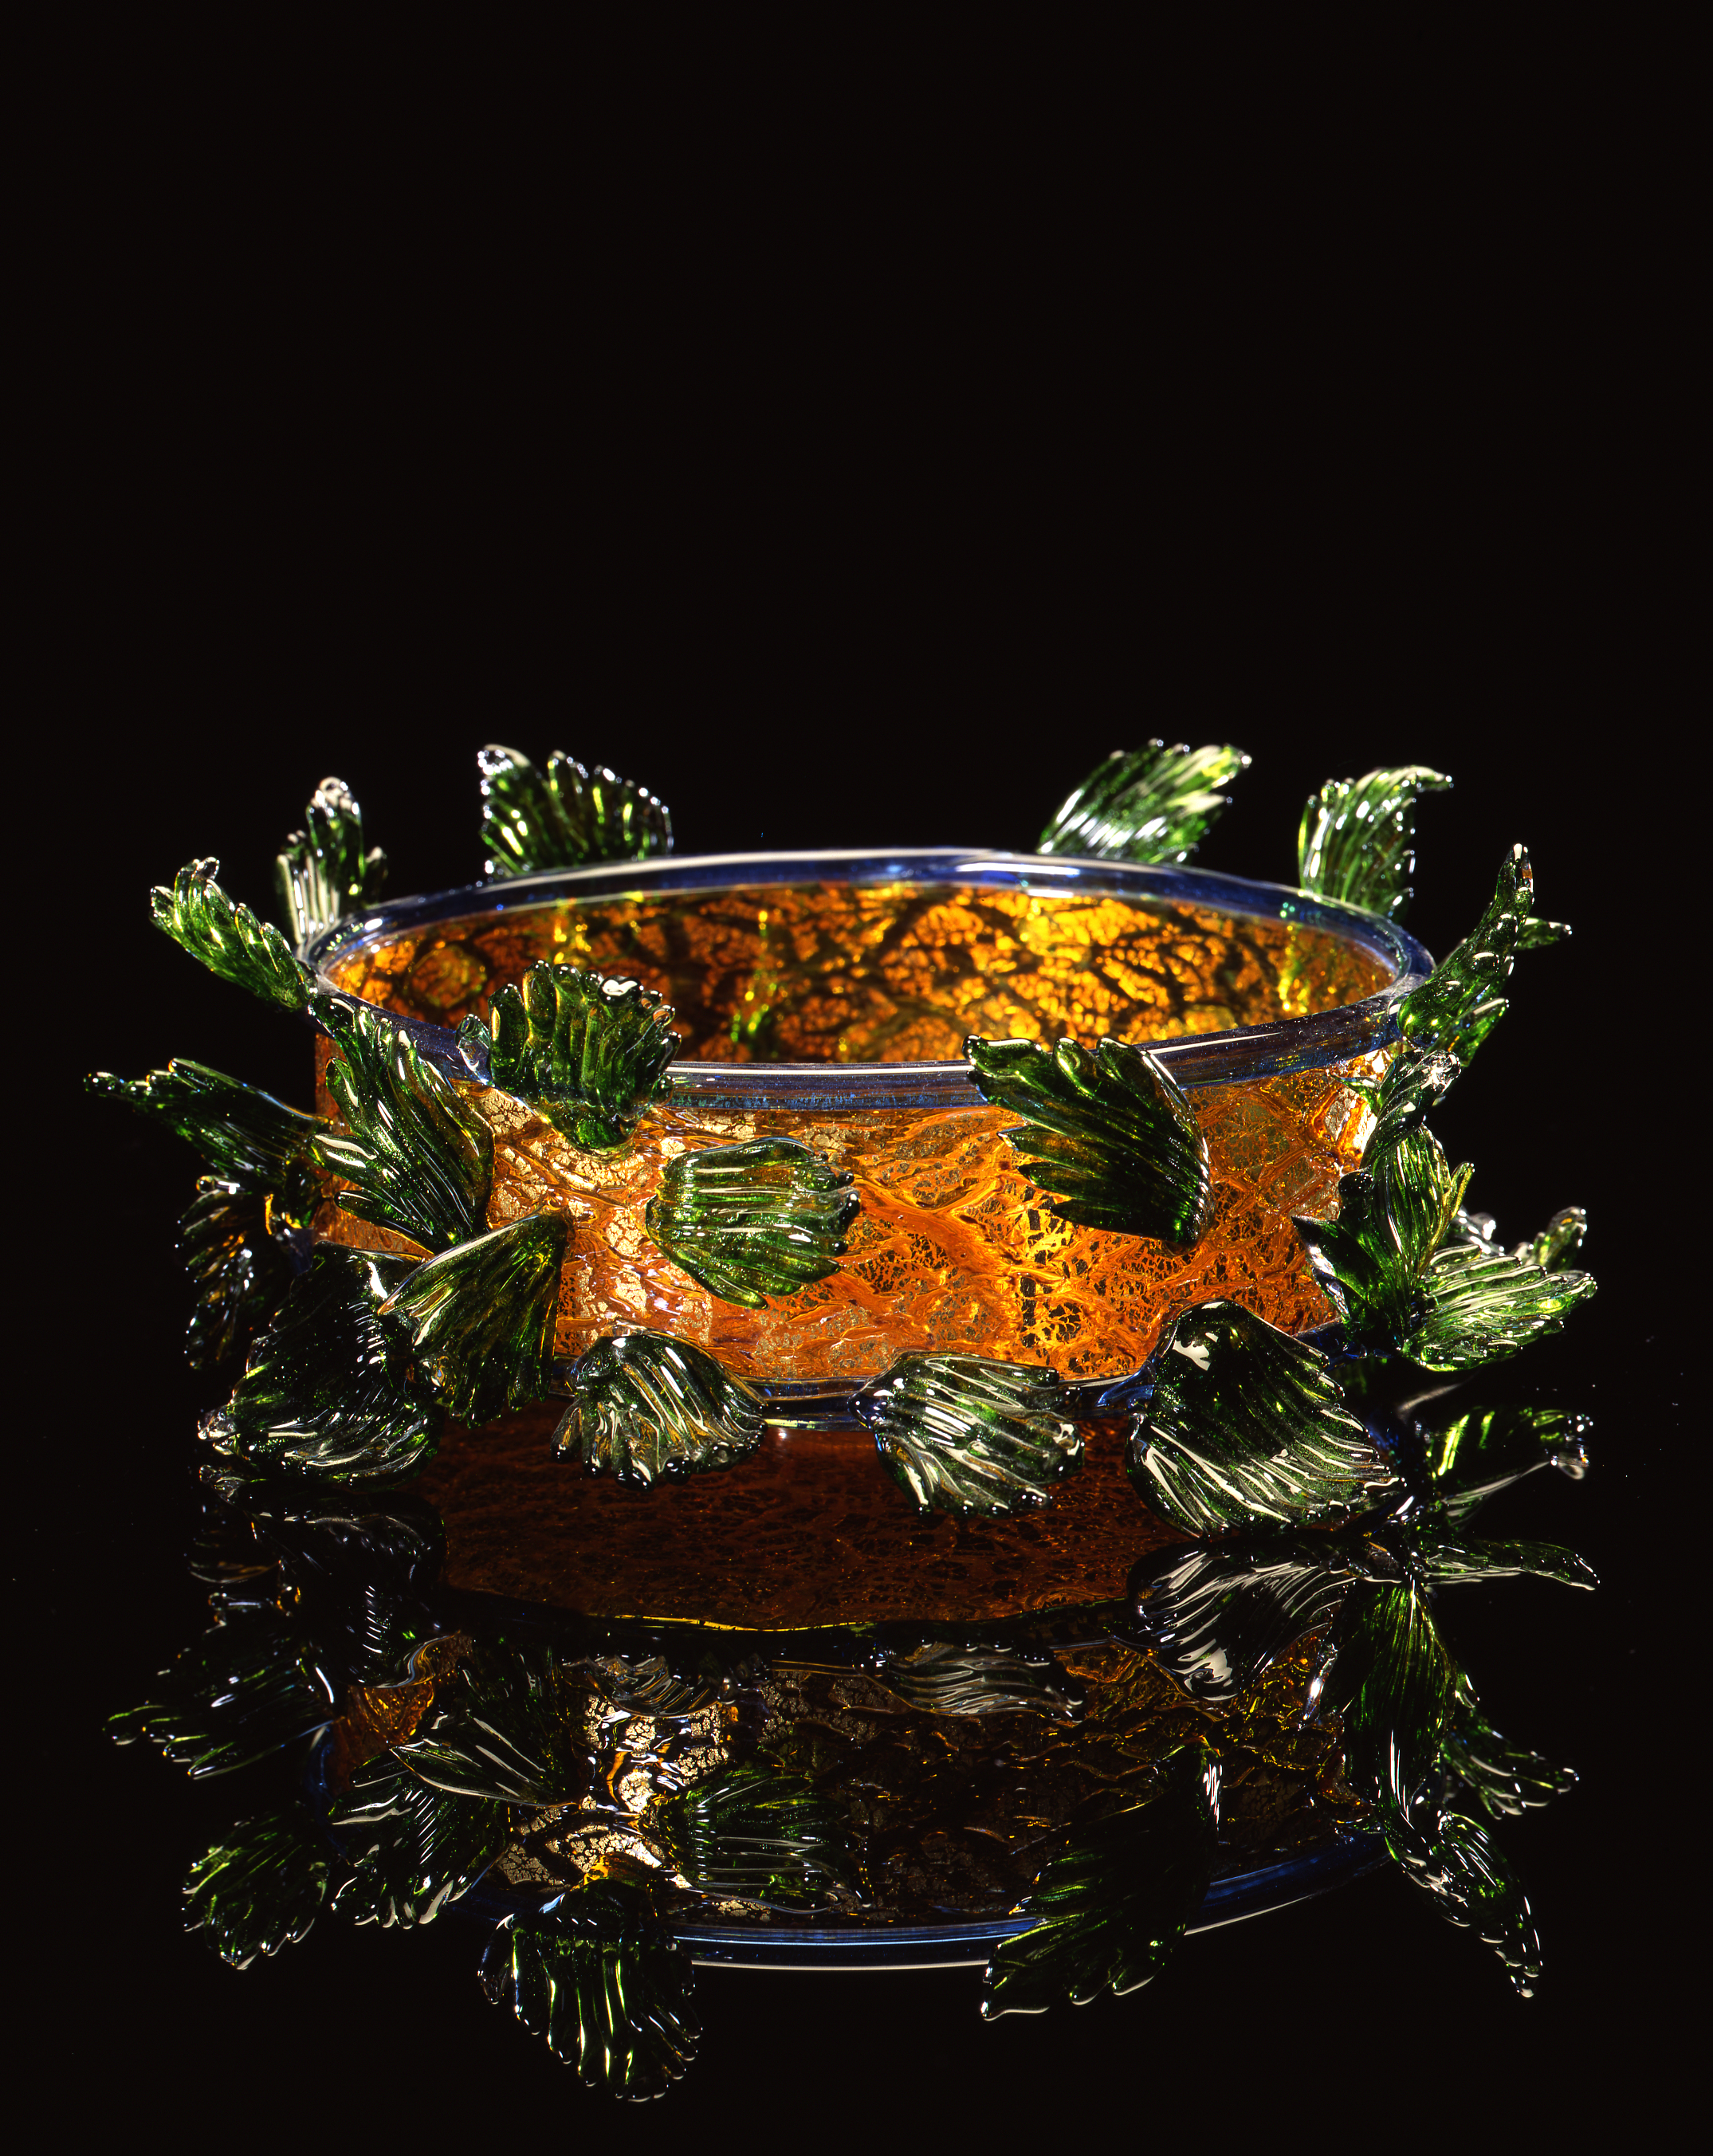  Dale Chihuly,&nbsp; Golden Brown Piccolo Venetian with Green Leaves &nbsp;(1994, glass, 4 x 10 x 10 inches) 